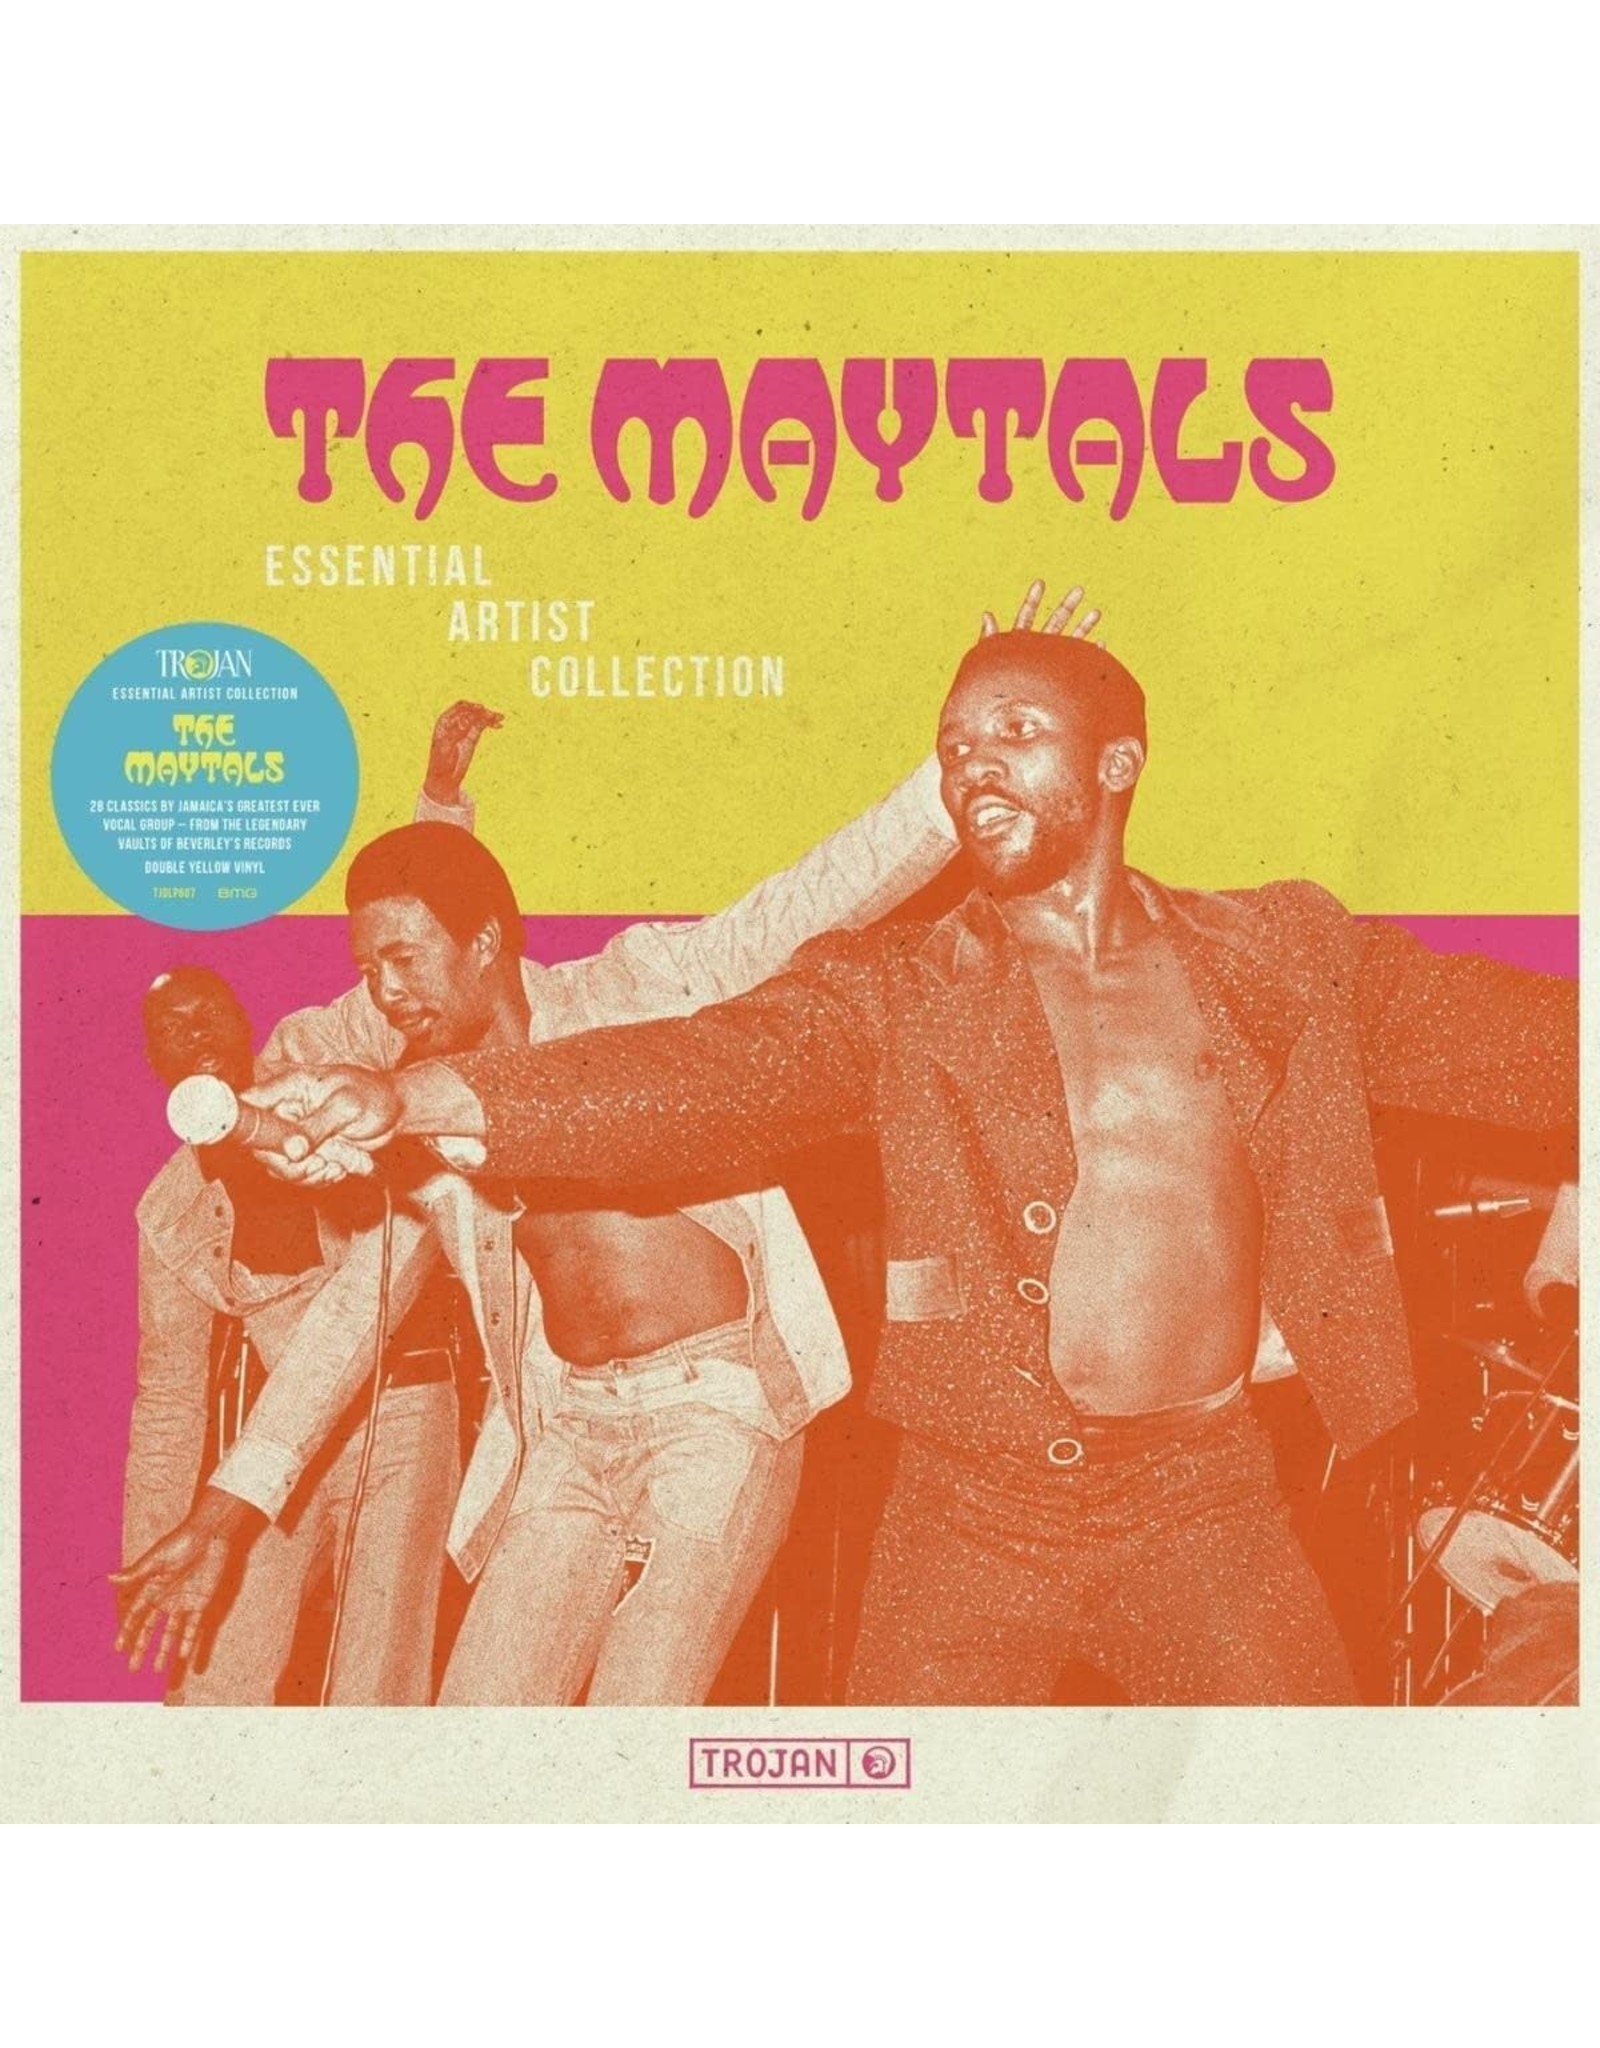 Maytals - Essential Collection (Yellow Vinyl)